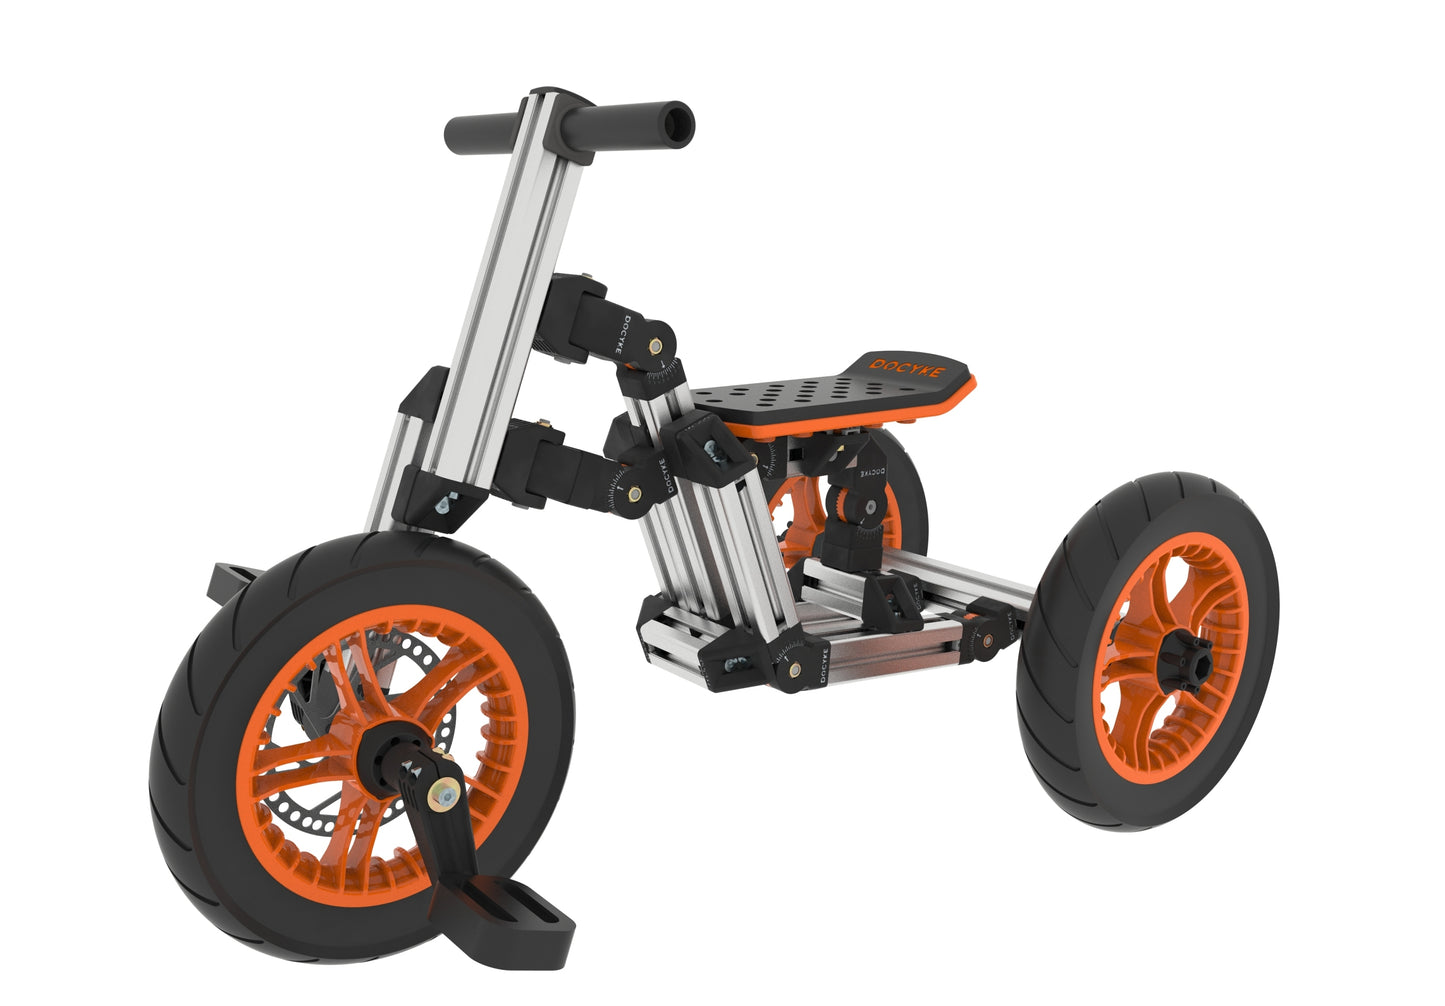 KidRock Buildable Kit 20 in 1 Kids Go Kart Set, Suitable for 1 to 8 Years Old, Two Wheel Bike, Three Wheel Bike, Go Kart, Sit/Stand Scooter, etc. Most Popular L Kit (Non Electric)